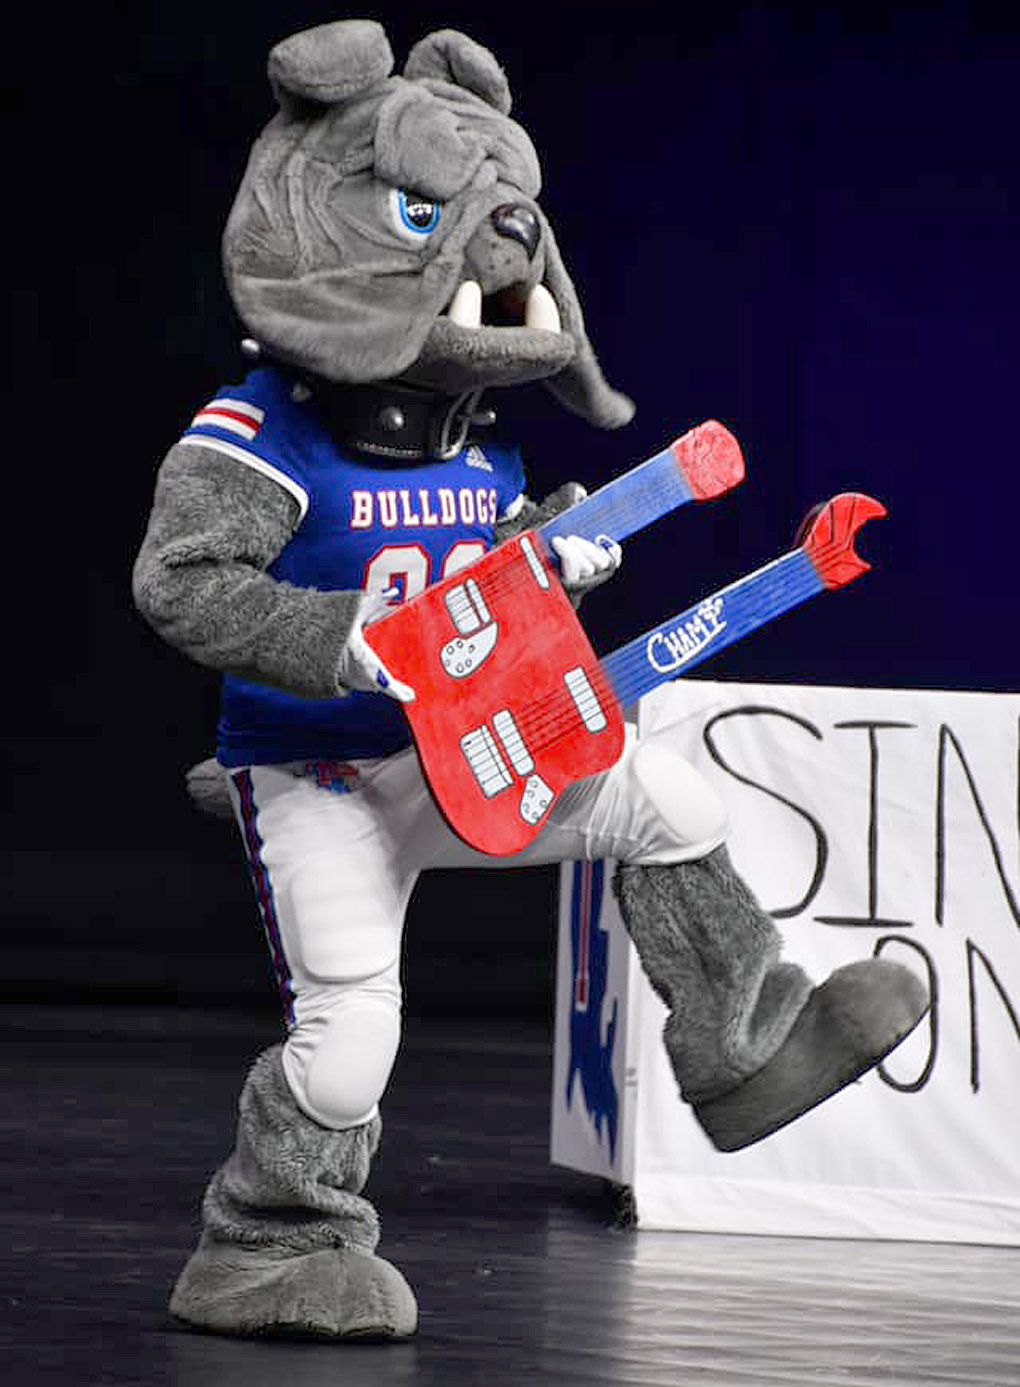 Champ places eighth at first national mascot championship appearance